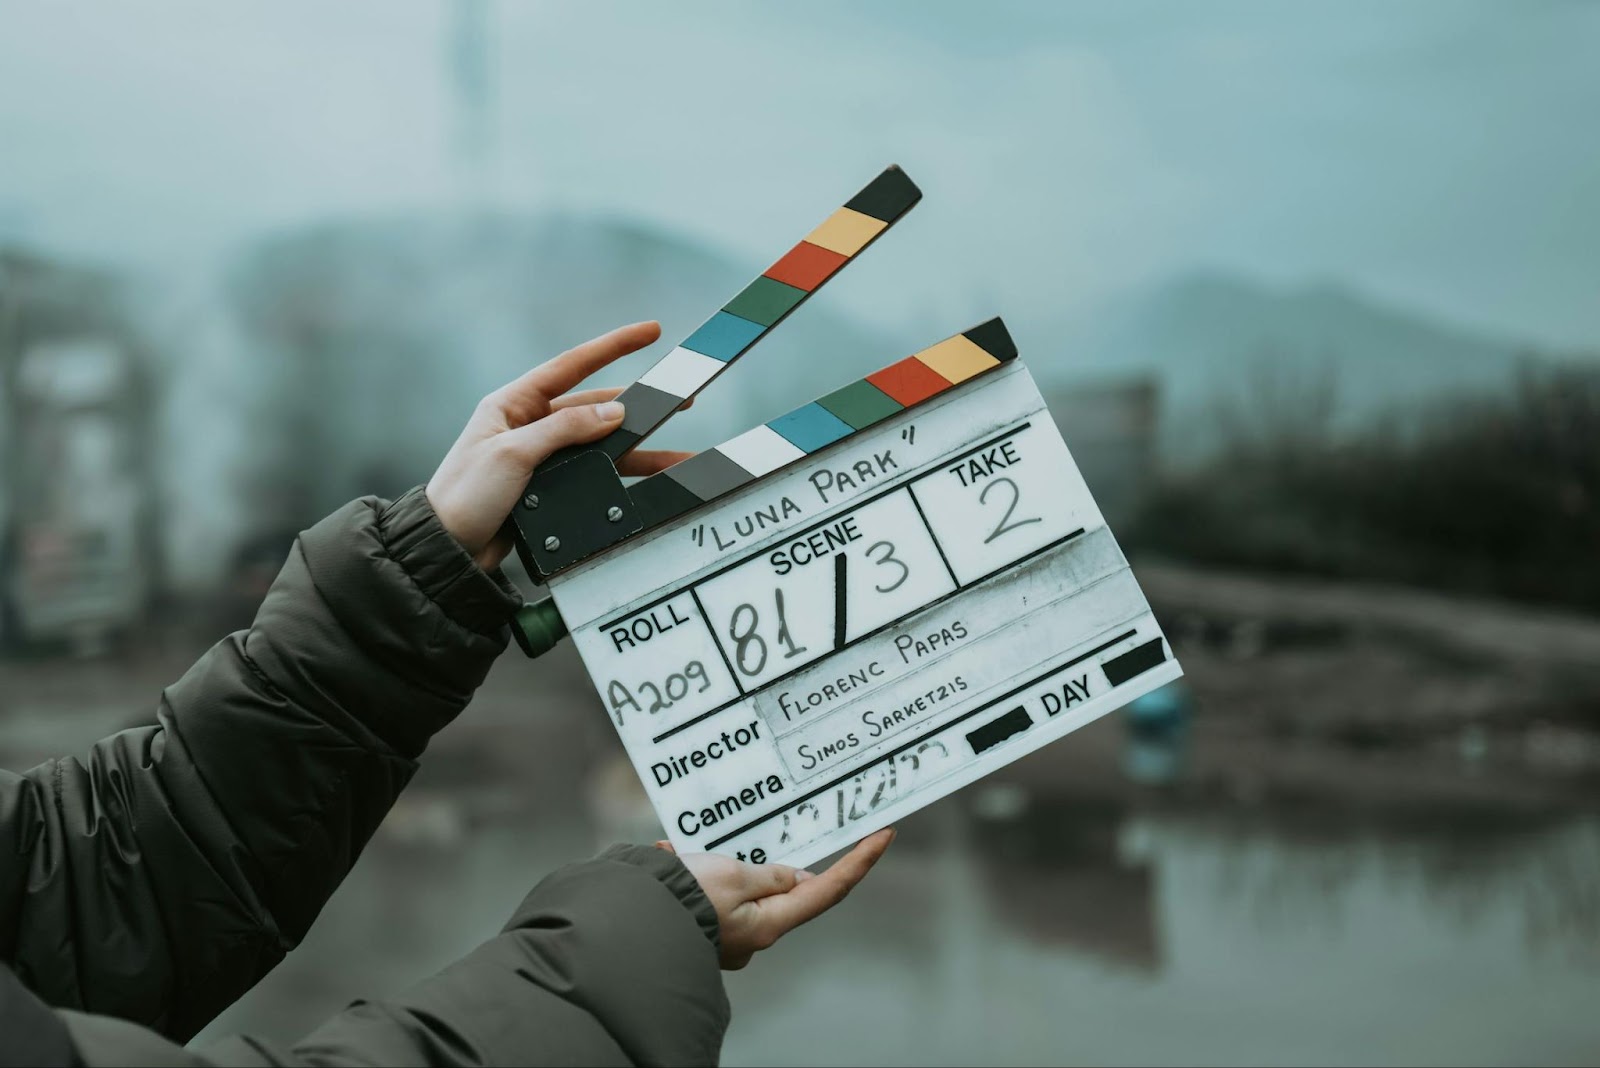 free photo of hands holding clapperboard